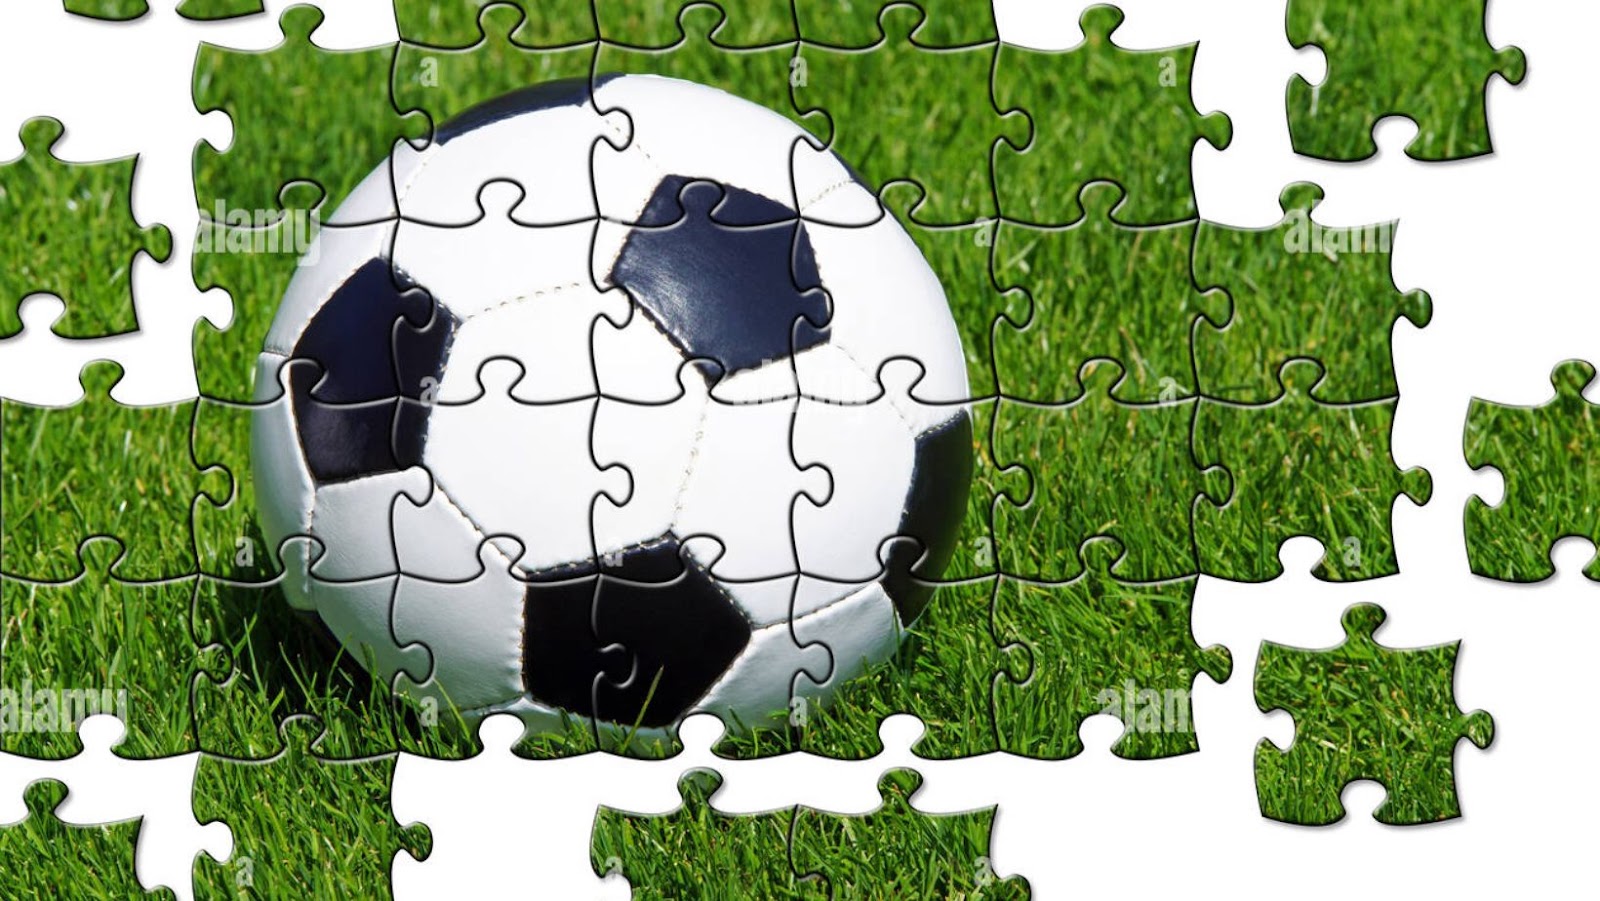 Football Crossword Puzzles One World Plate